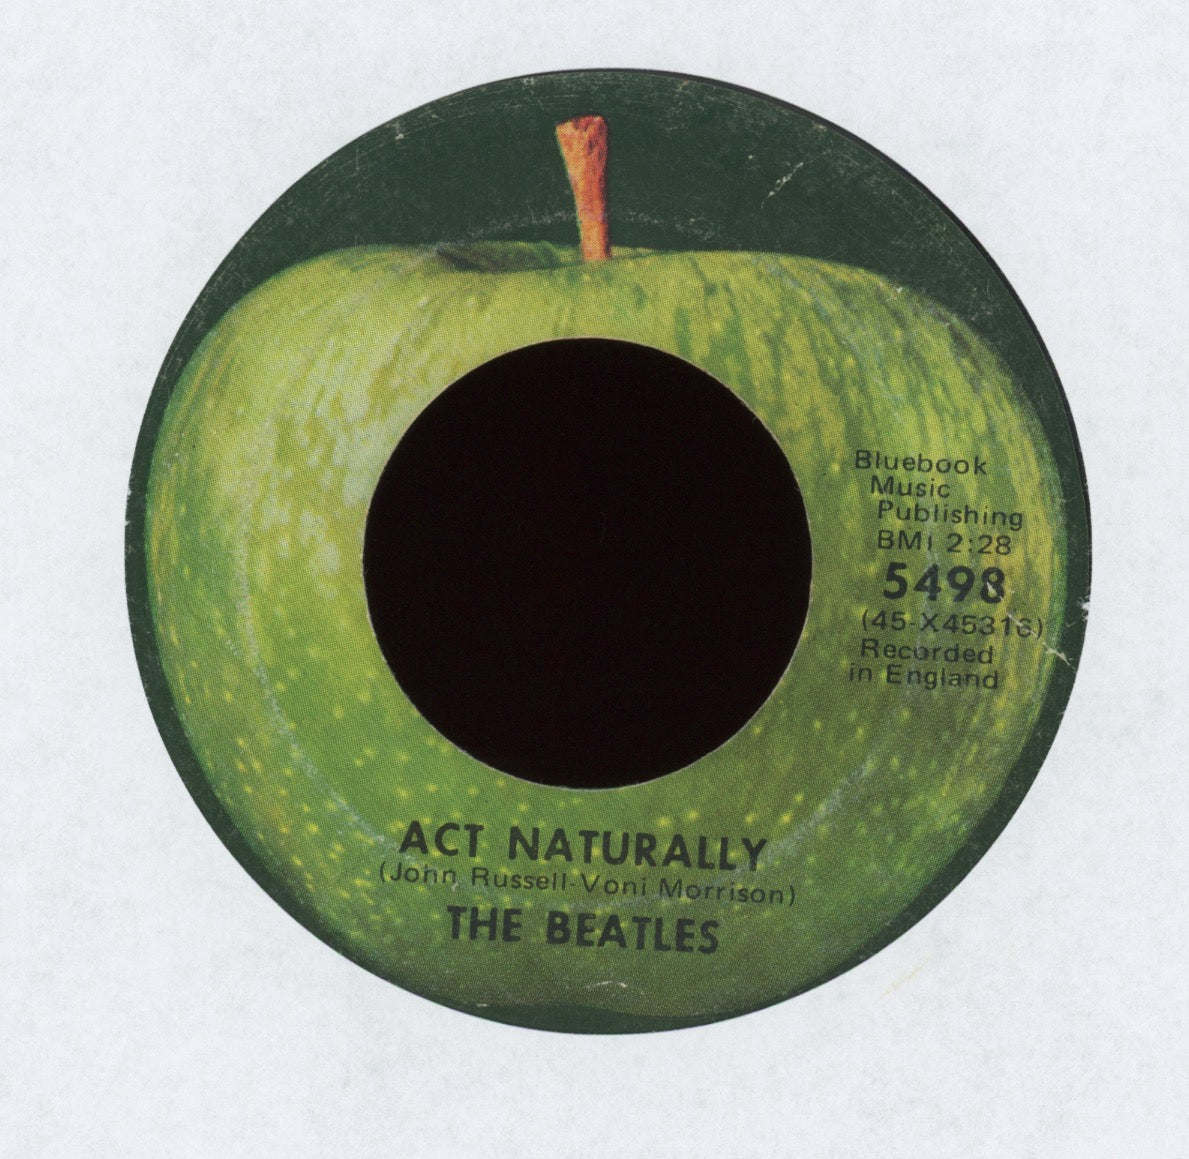 The Beatles - Yesterday / Act Naturally on Apple With Picture Sleeve